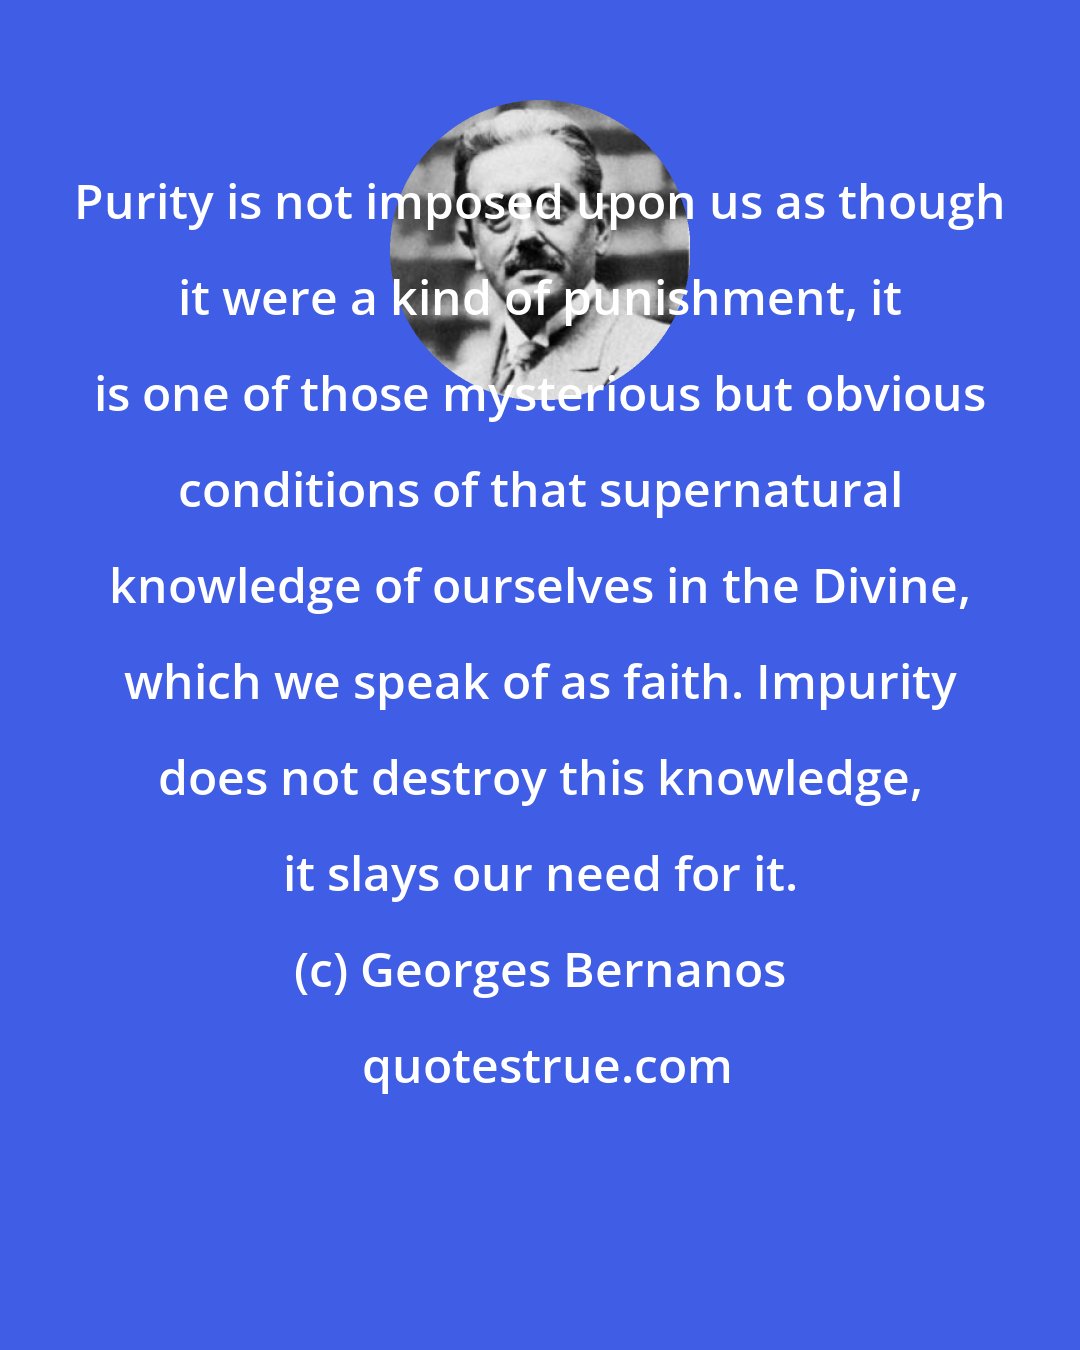 Georges Bernanos: Purity is not imposed upon us as though it were a kind of punishment, it is one of those mysterious but obvious conditions of that supernatural knowledge of ourselves in the Divine, which we speak of as faith. Impurity does not destroy this knowledge, it slays our need for it.